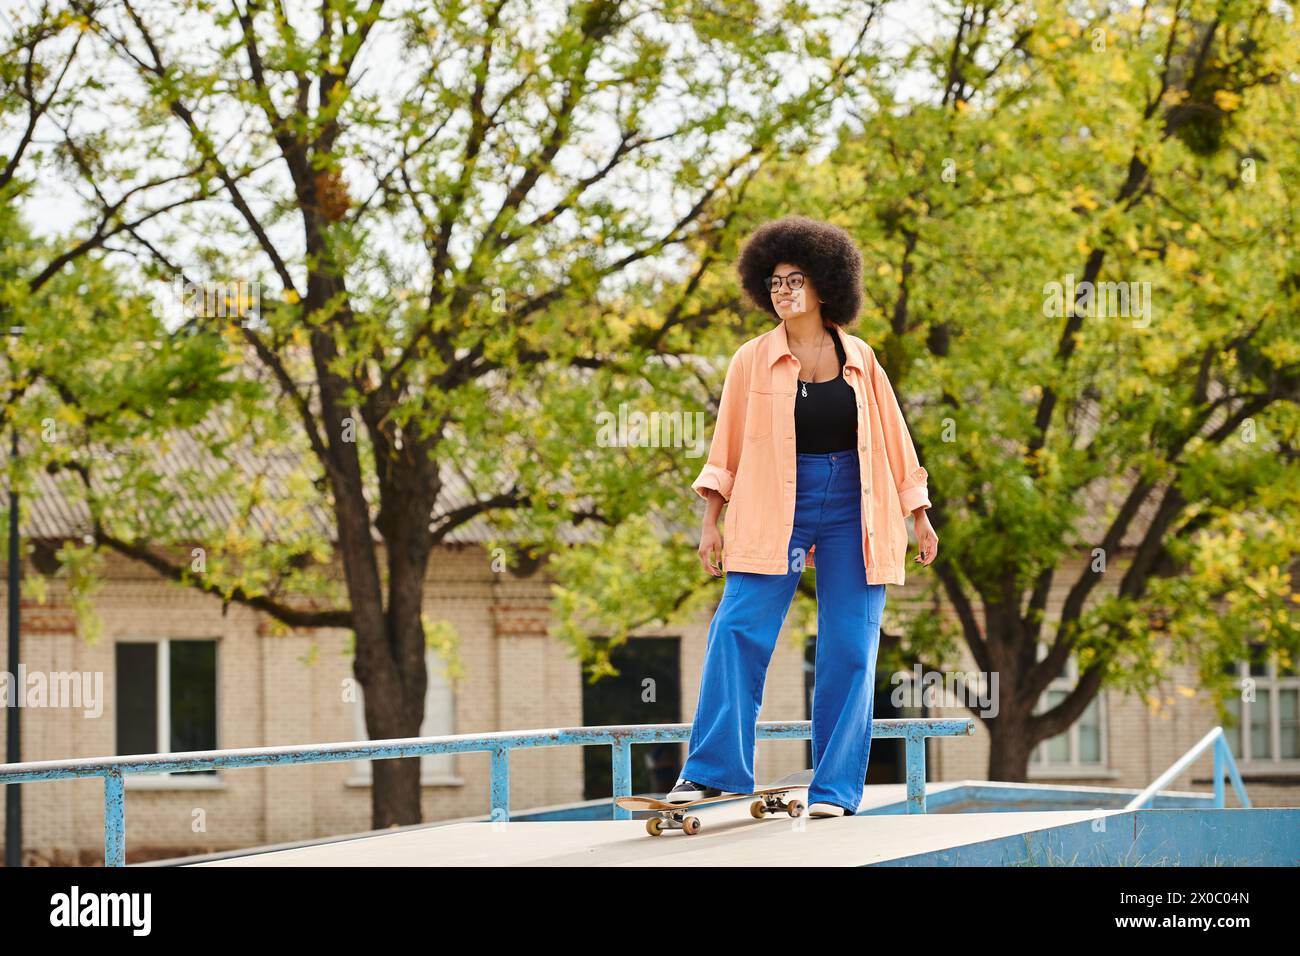 Young African American woman with curly hair skillfully riding a skateboard on top of a ramp at an outdoor skate park. Stock Photo